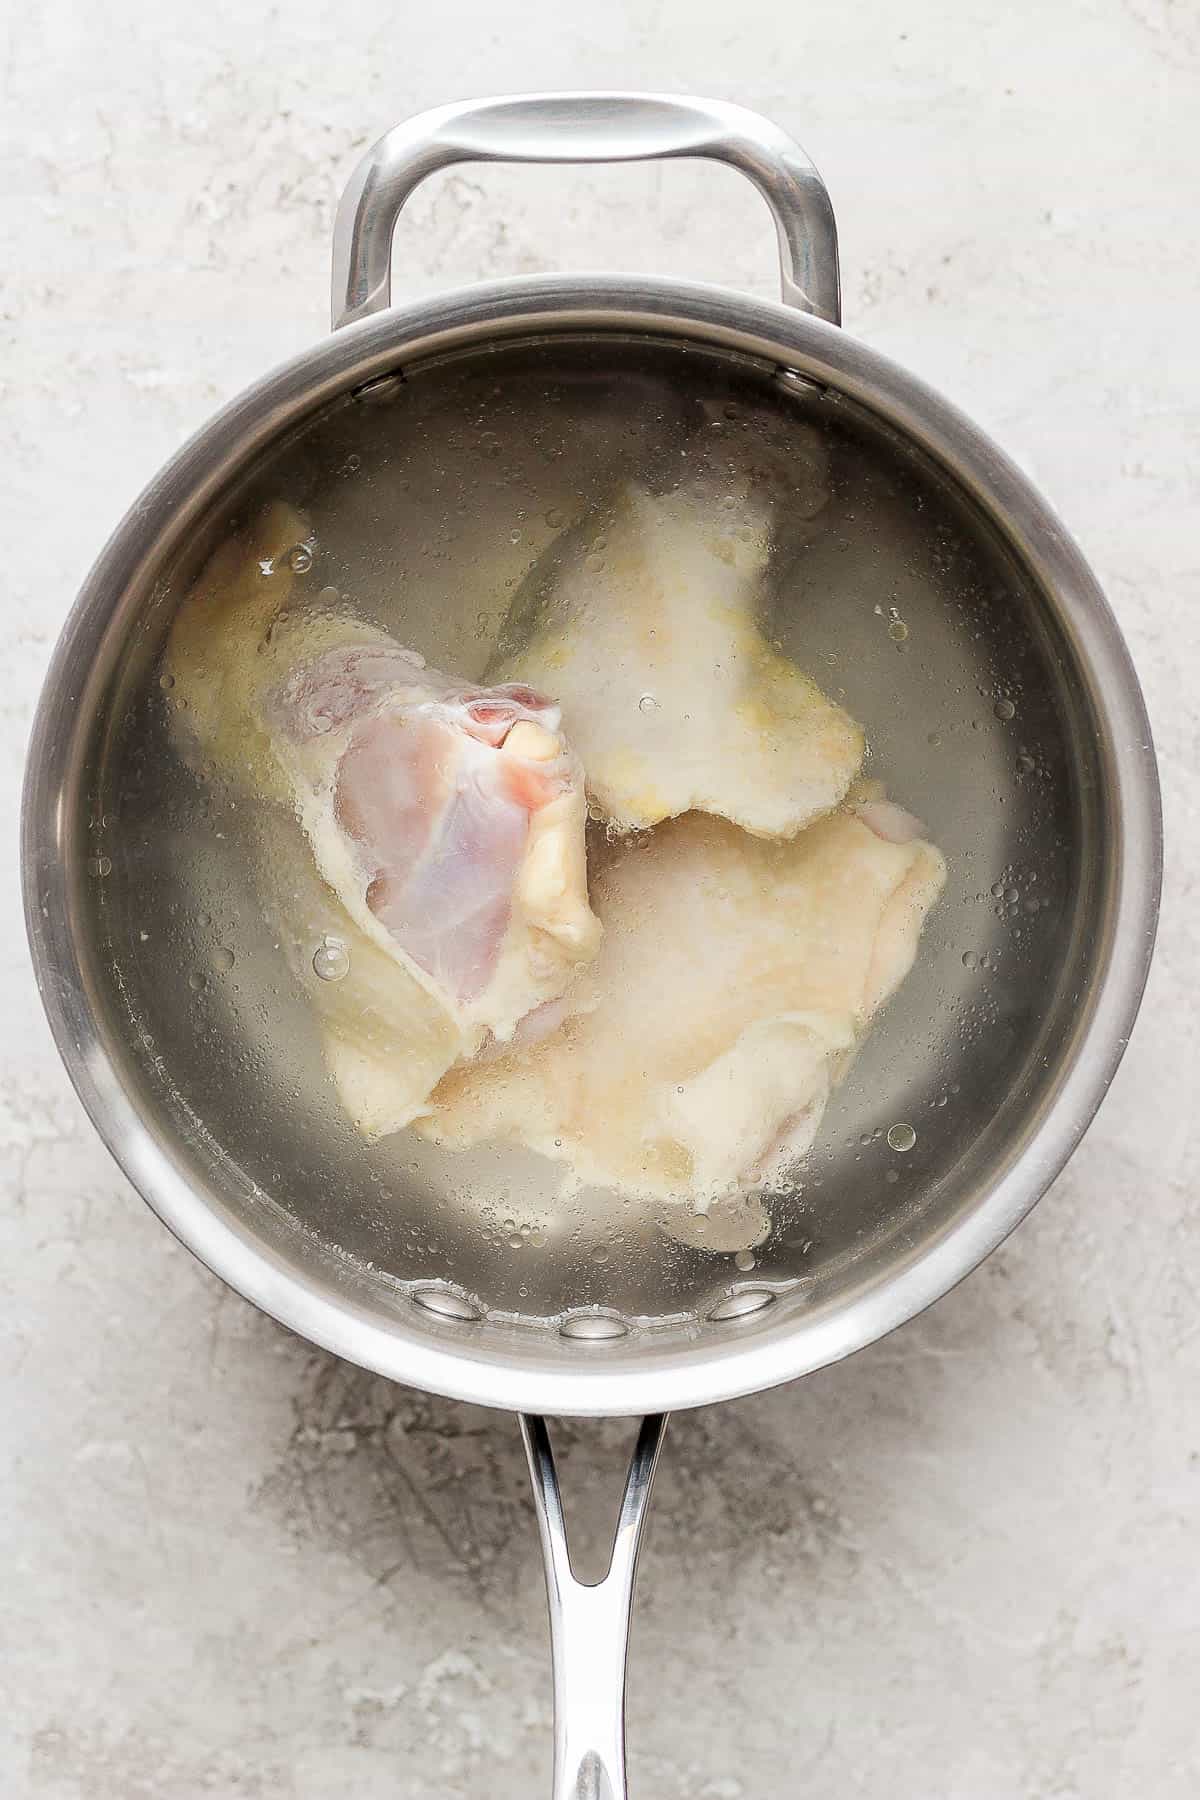 Three chicken thighs in a pot of water.